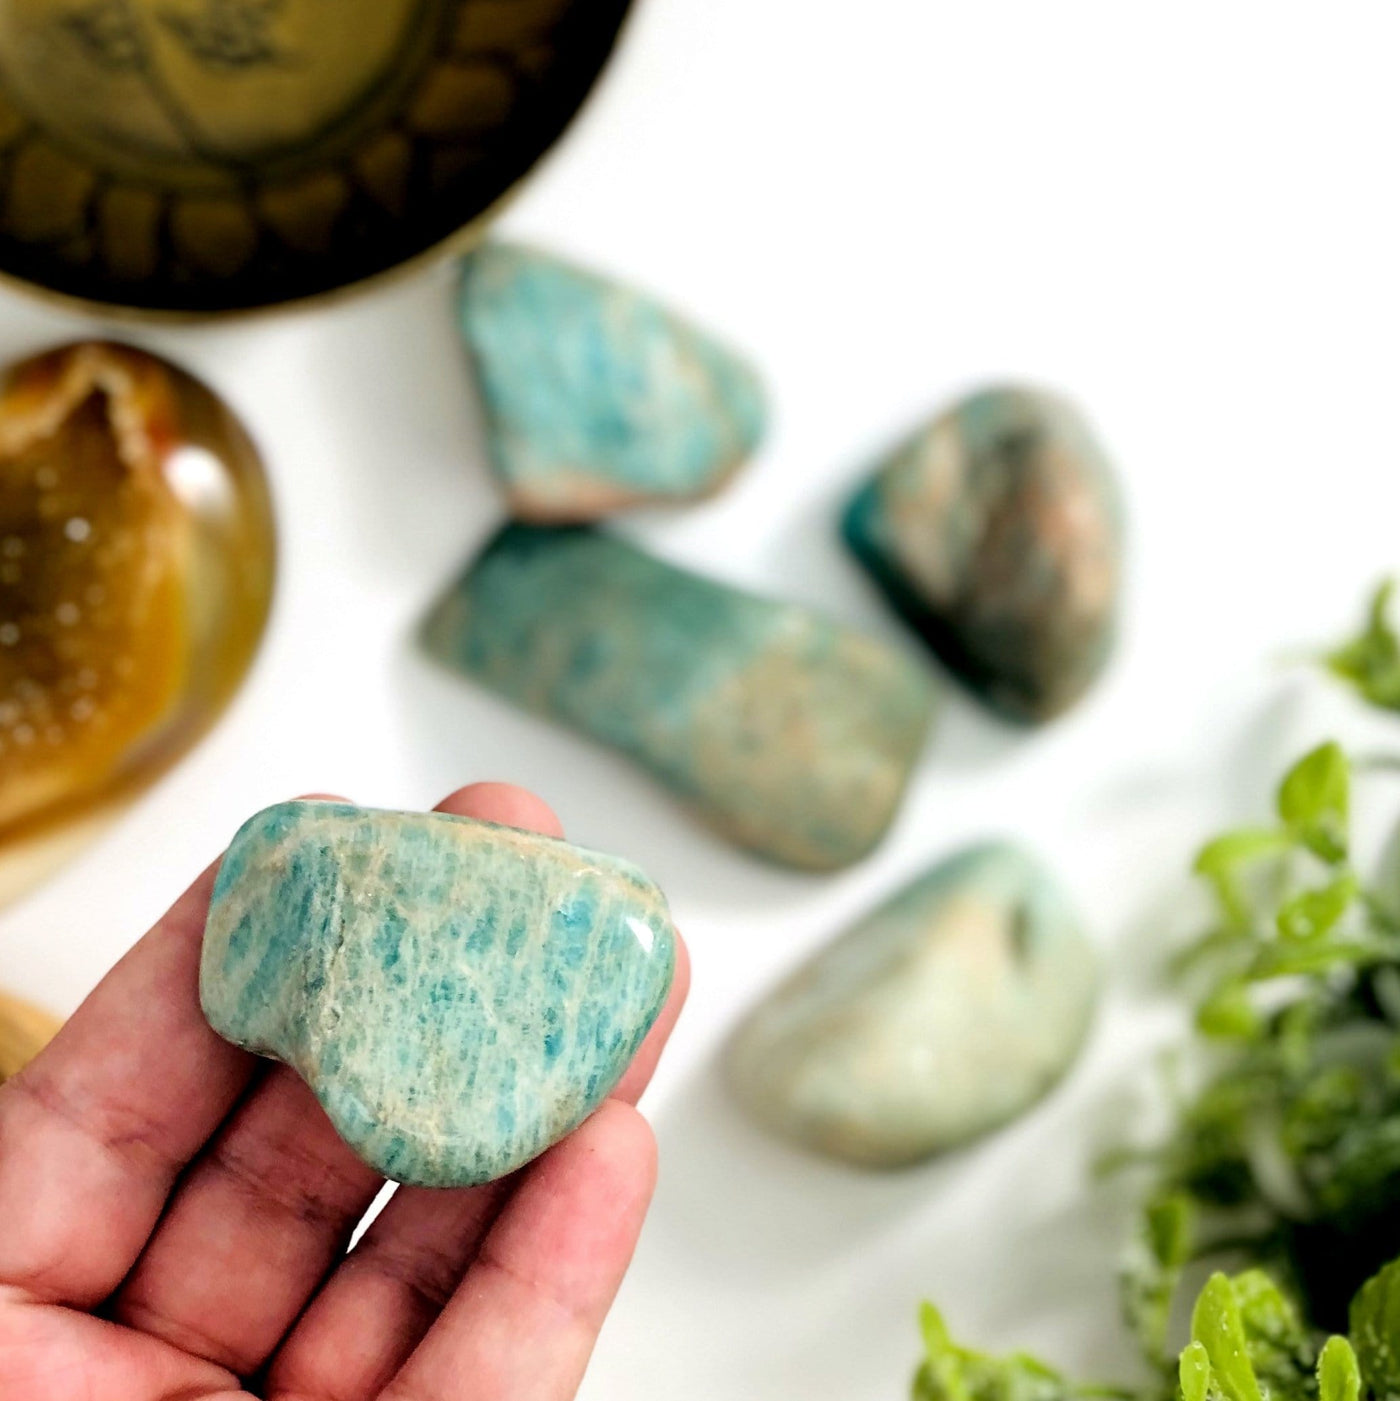 Amazonite tumbled stones.  They are a greenish blue shade and some have tan markings.  One is held in a hand and other are blurred on a white background.